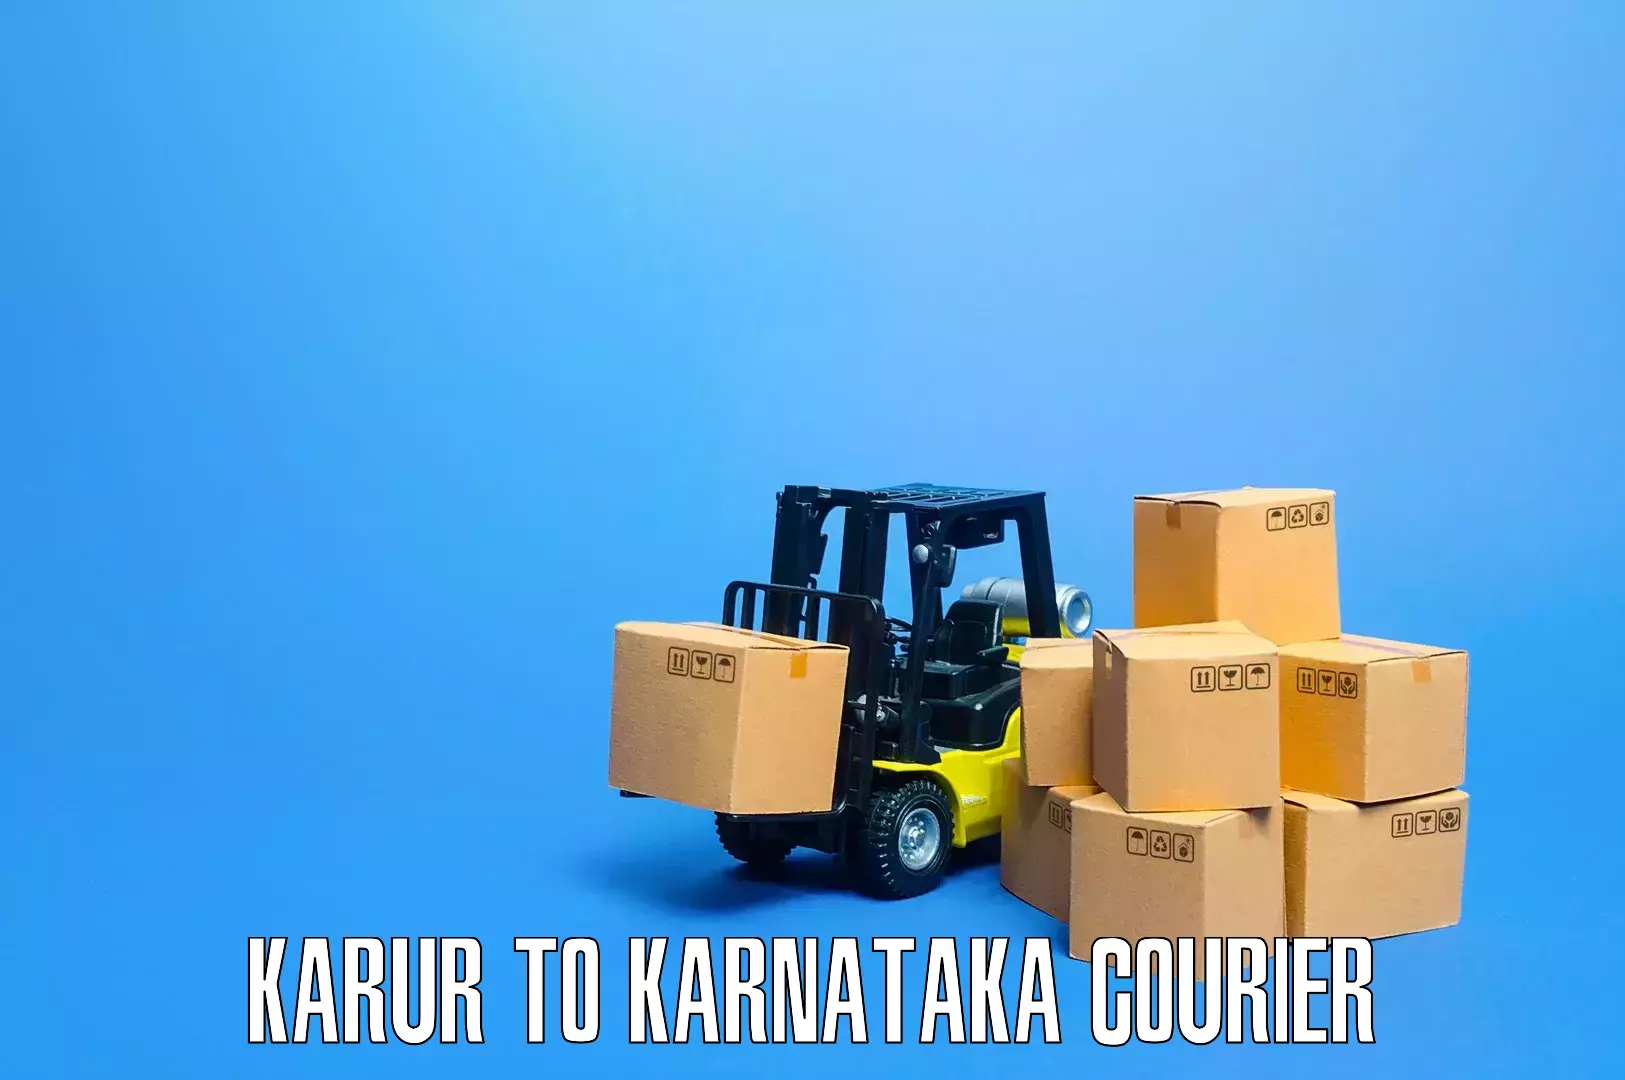 Furniture transport specialists Karur to Manipal Academy of Higher Education